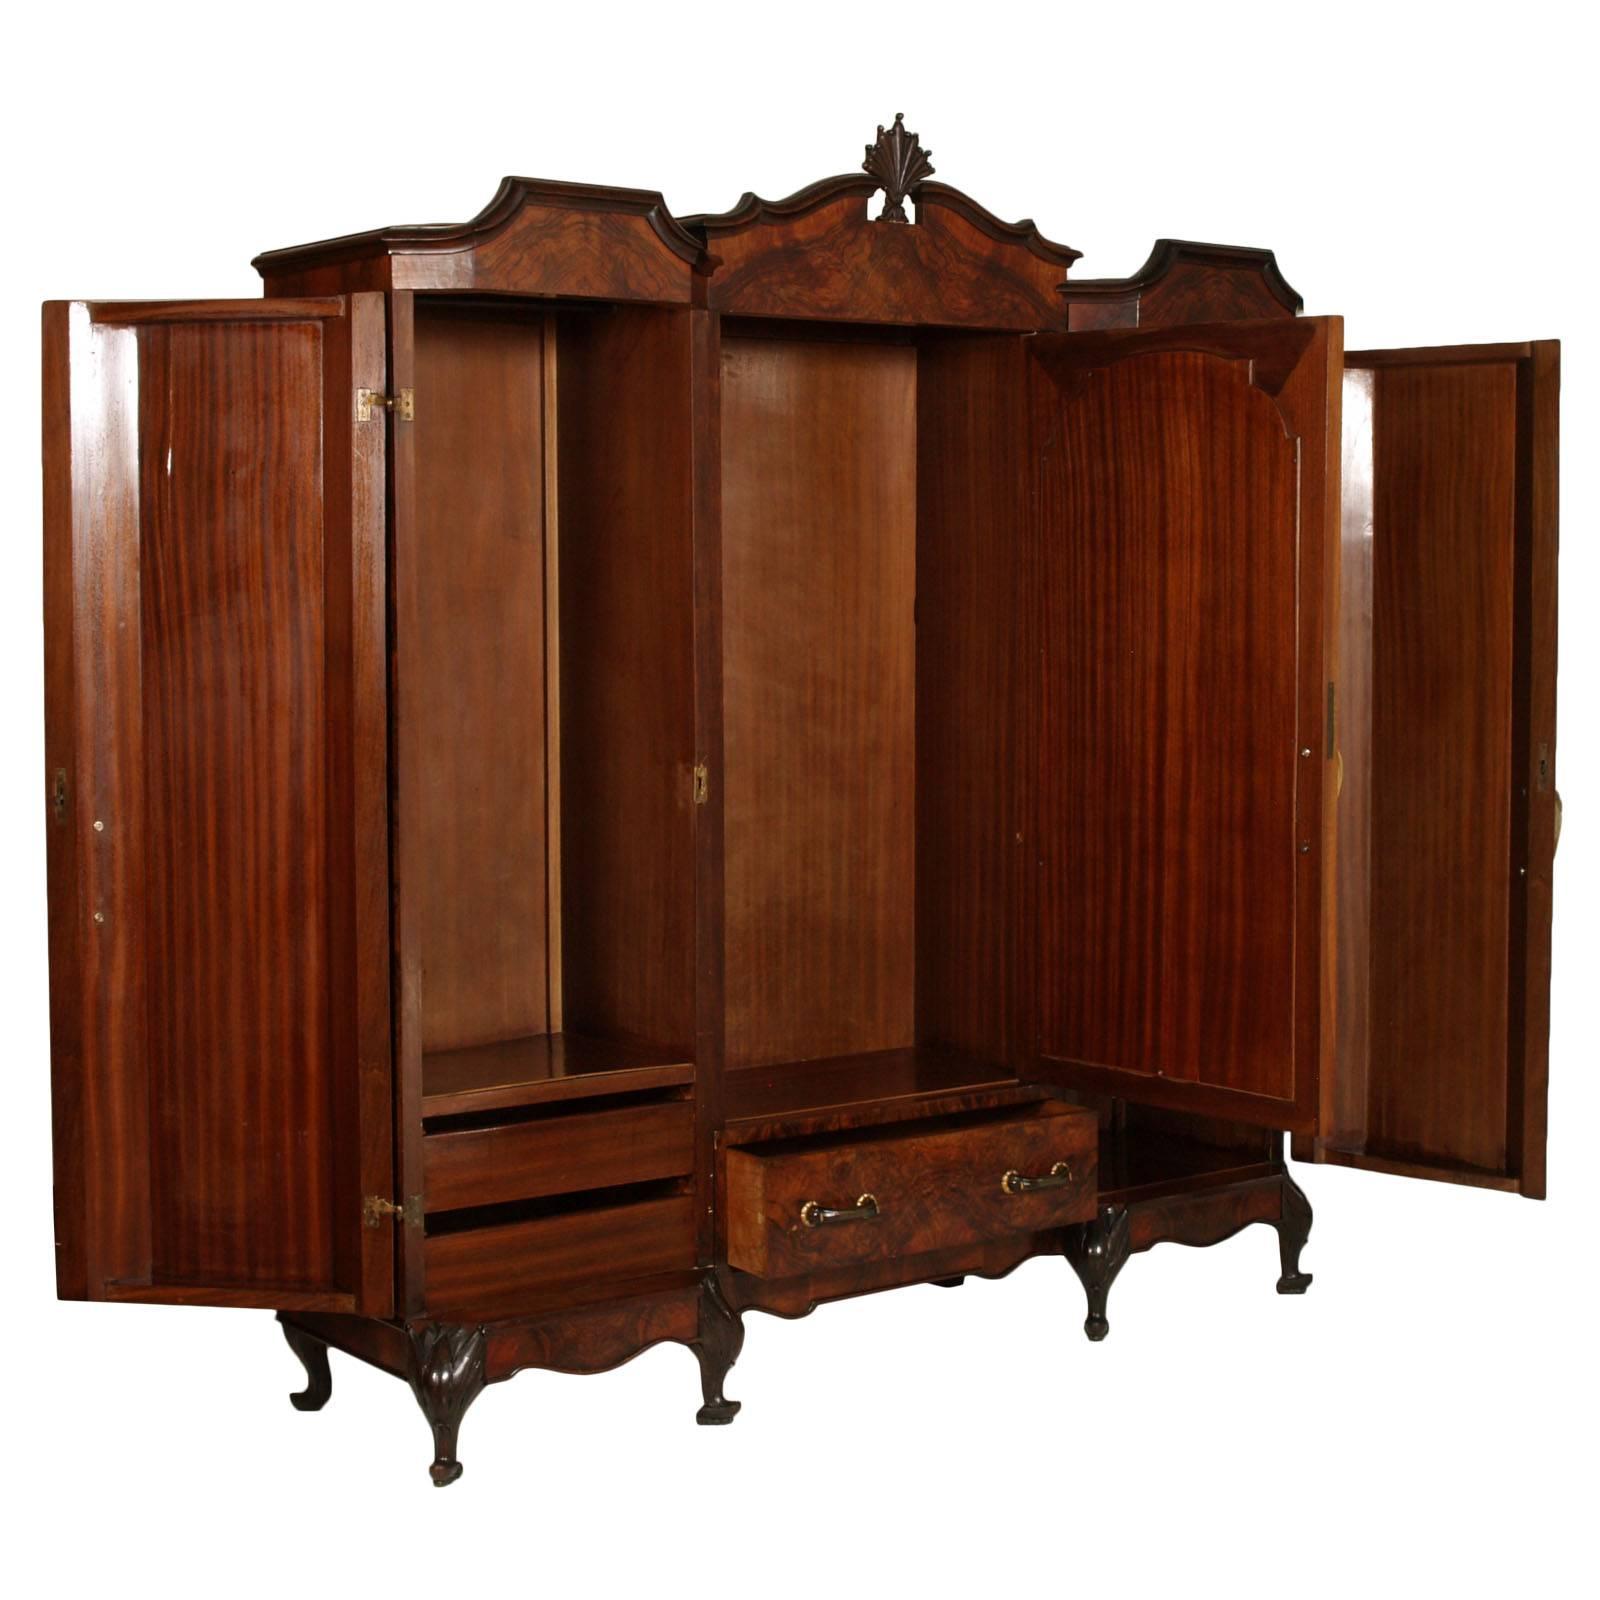 Elegant Venetian Ecleltic Baroque-revival cupboard wardrobe with mirror in burl walnut, circa 1920s. Attributable to Vincenzo Cadorin. Restored and polished to wax.

Measures cm: H 227 x W 199 x D 58.